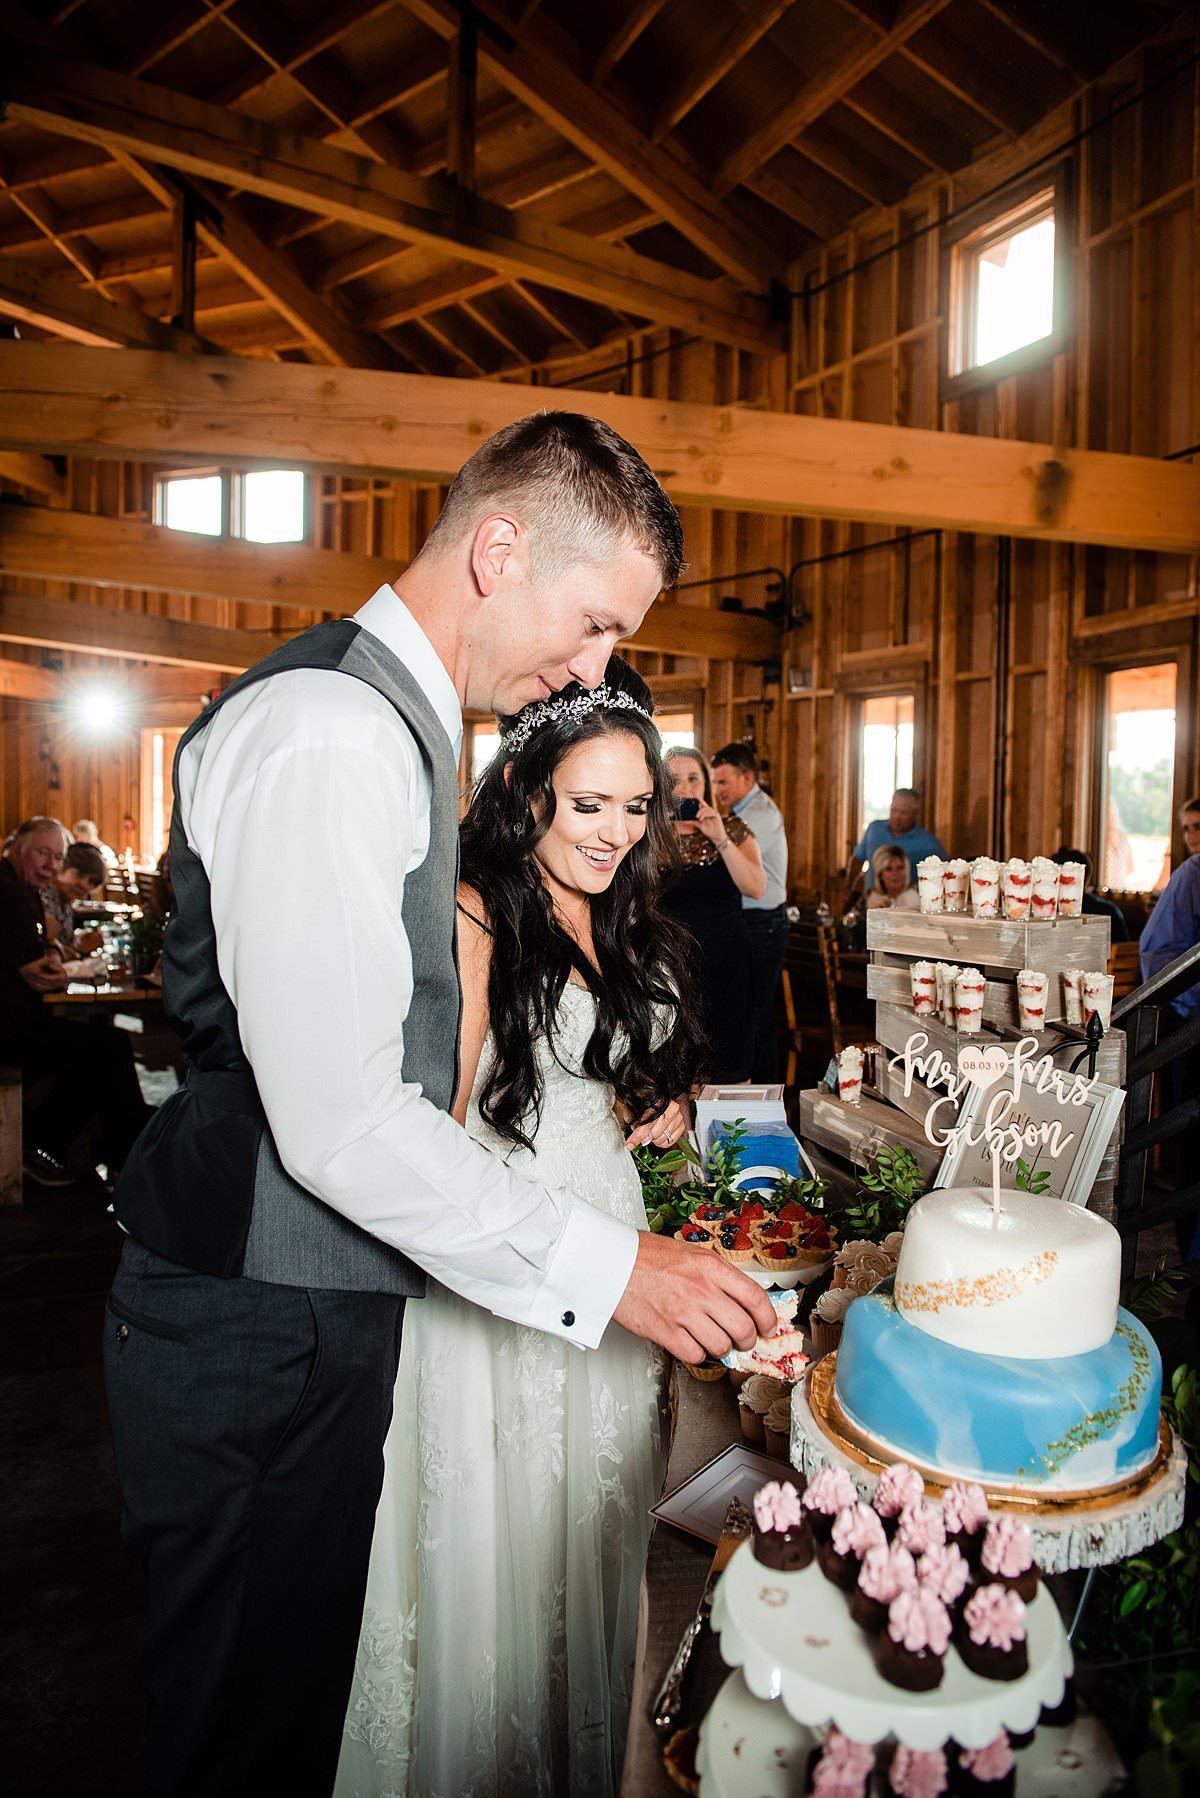 Bride and groom cutting their wedding cake inside of the barn